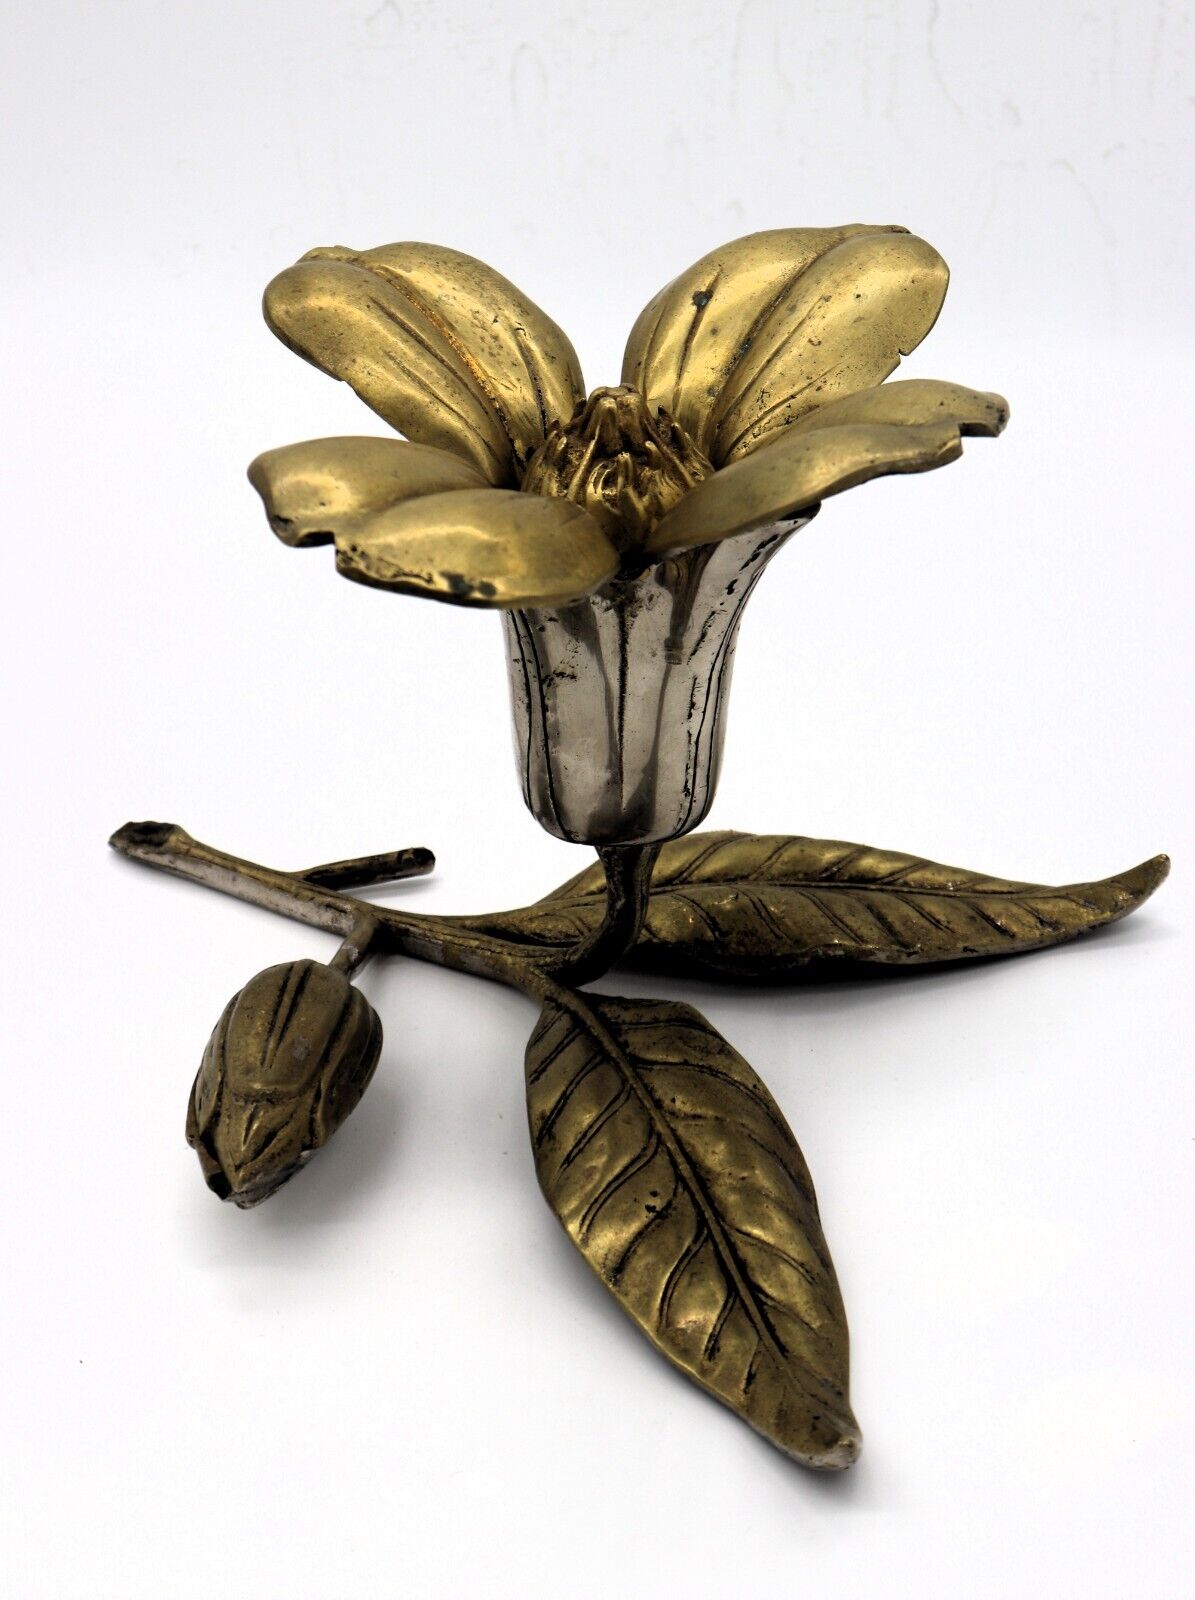 Vintage Mid-Century Large Lotus Flower Ashtray with Four Metal Removable Petals